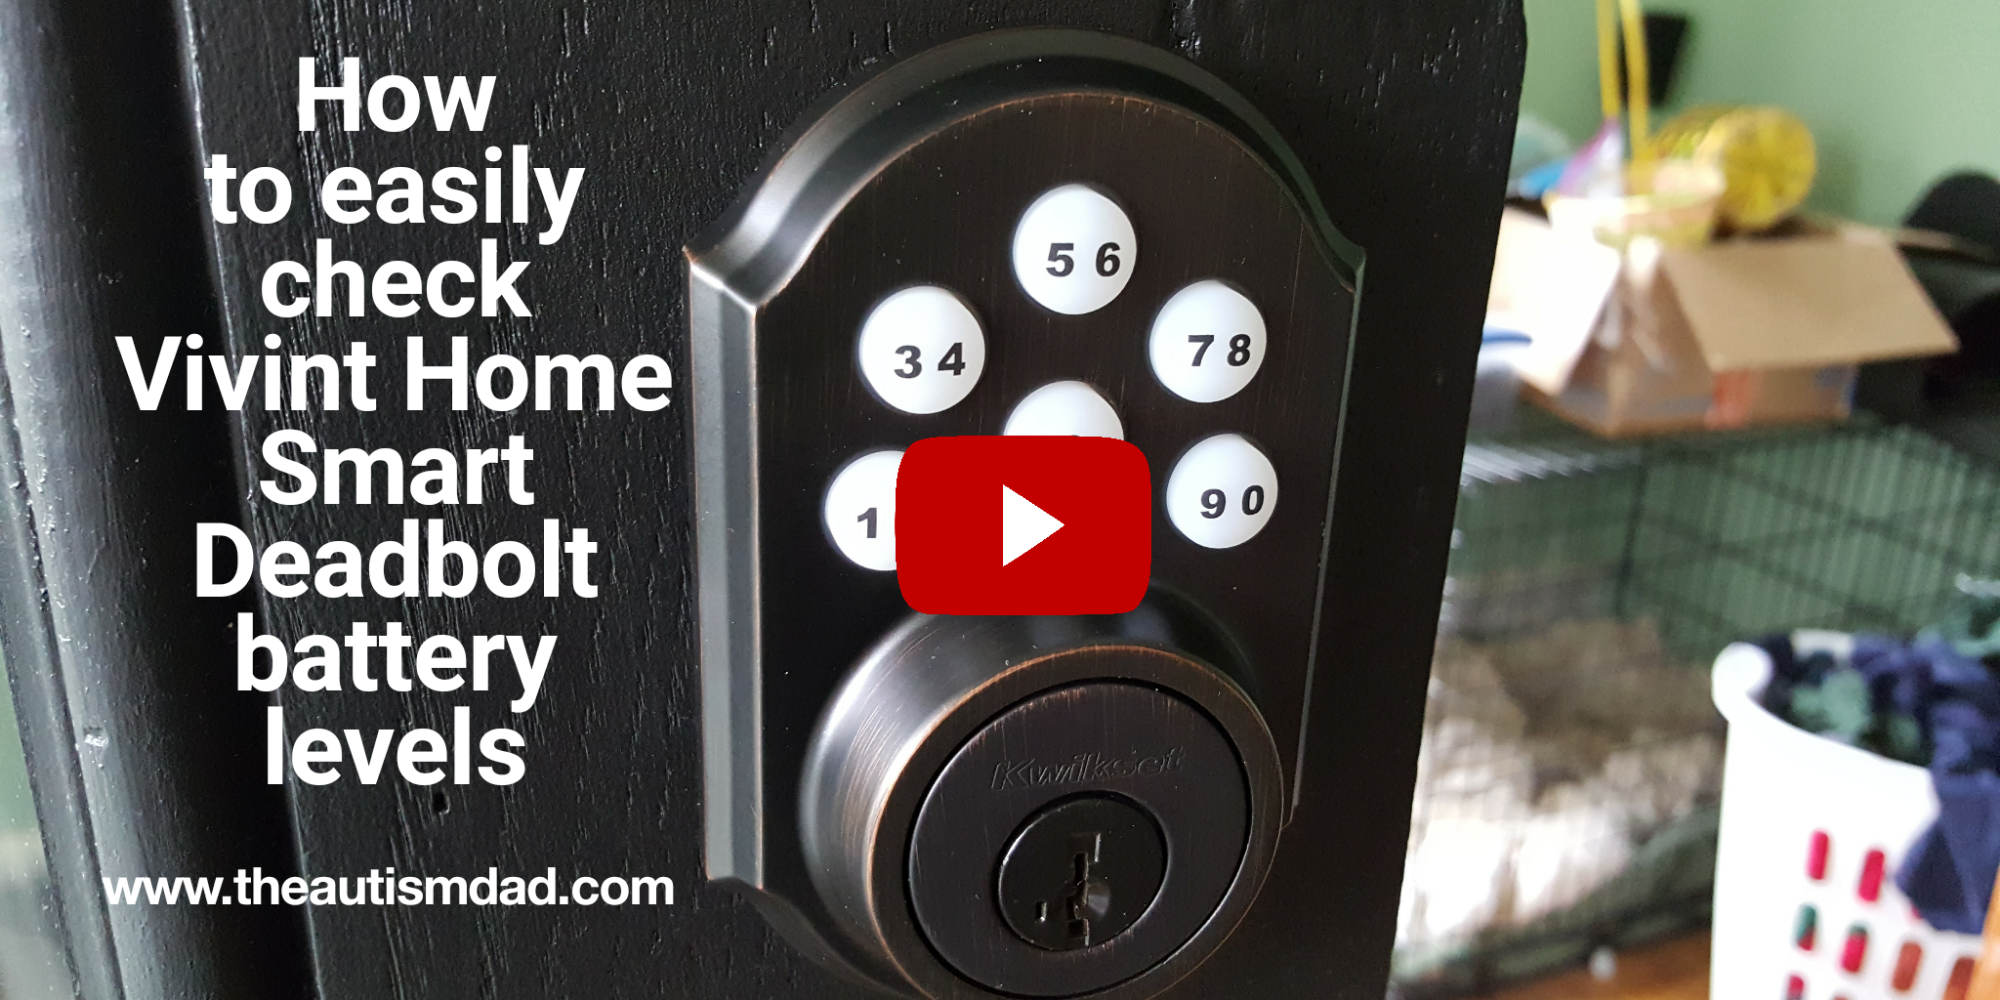 How to easily check @VivintHome Smart Deadbolt battery levels